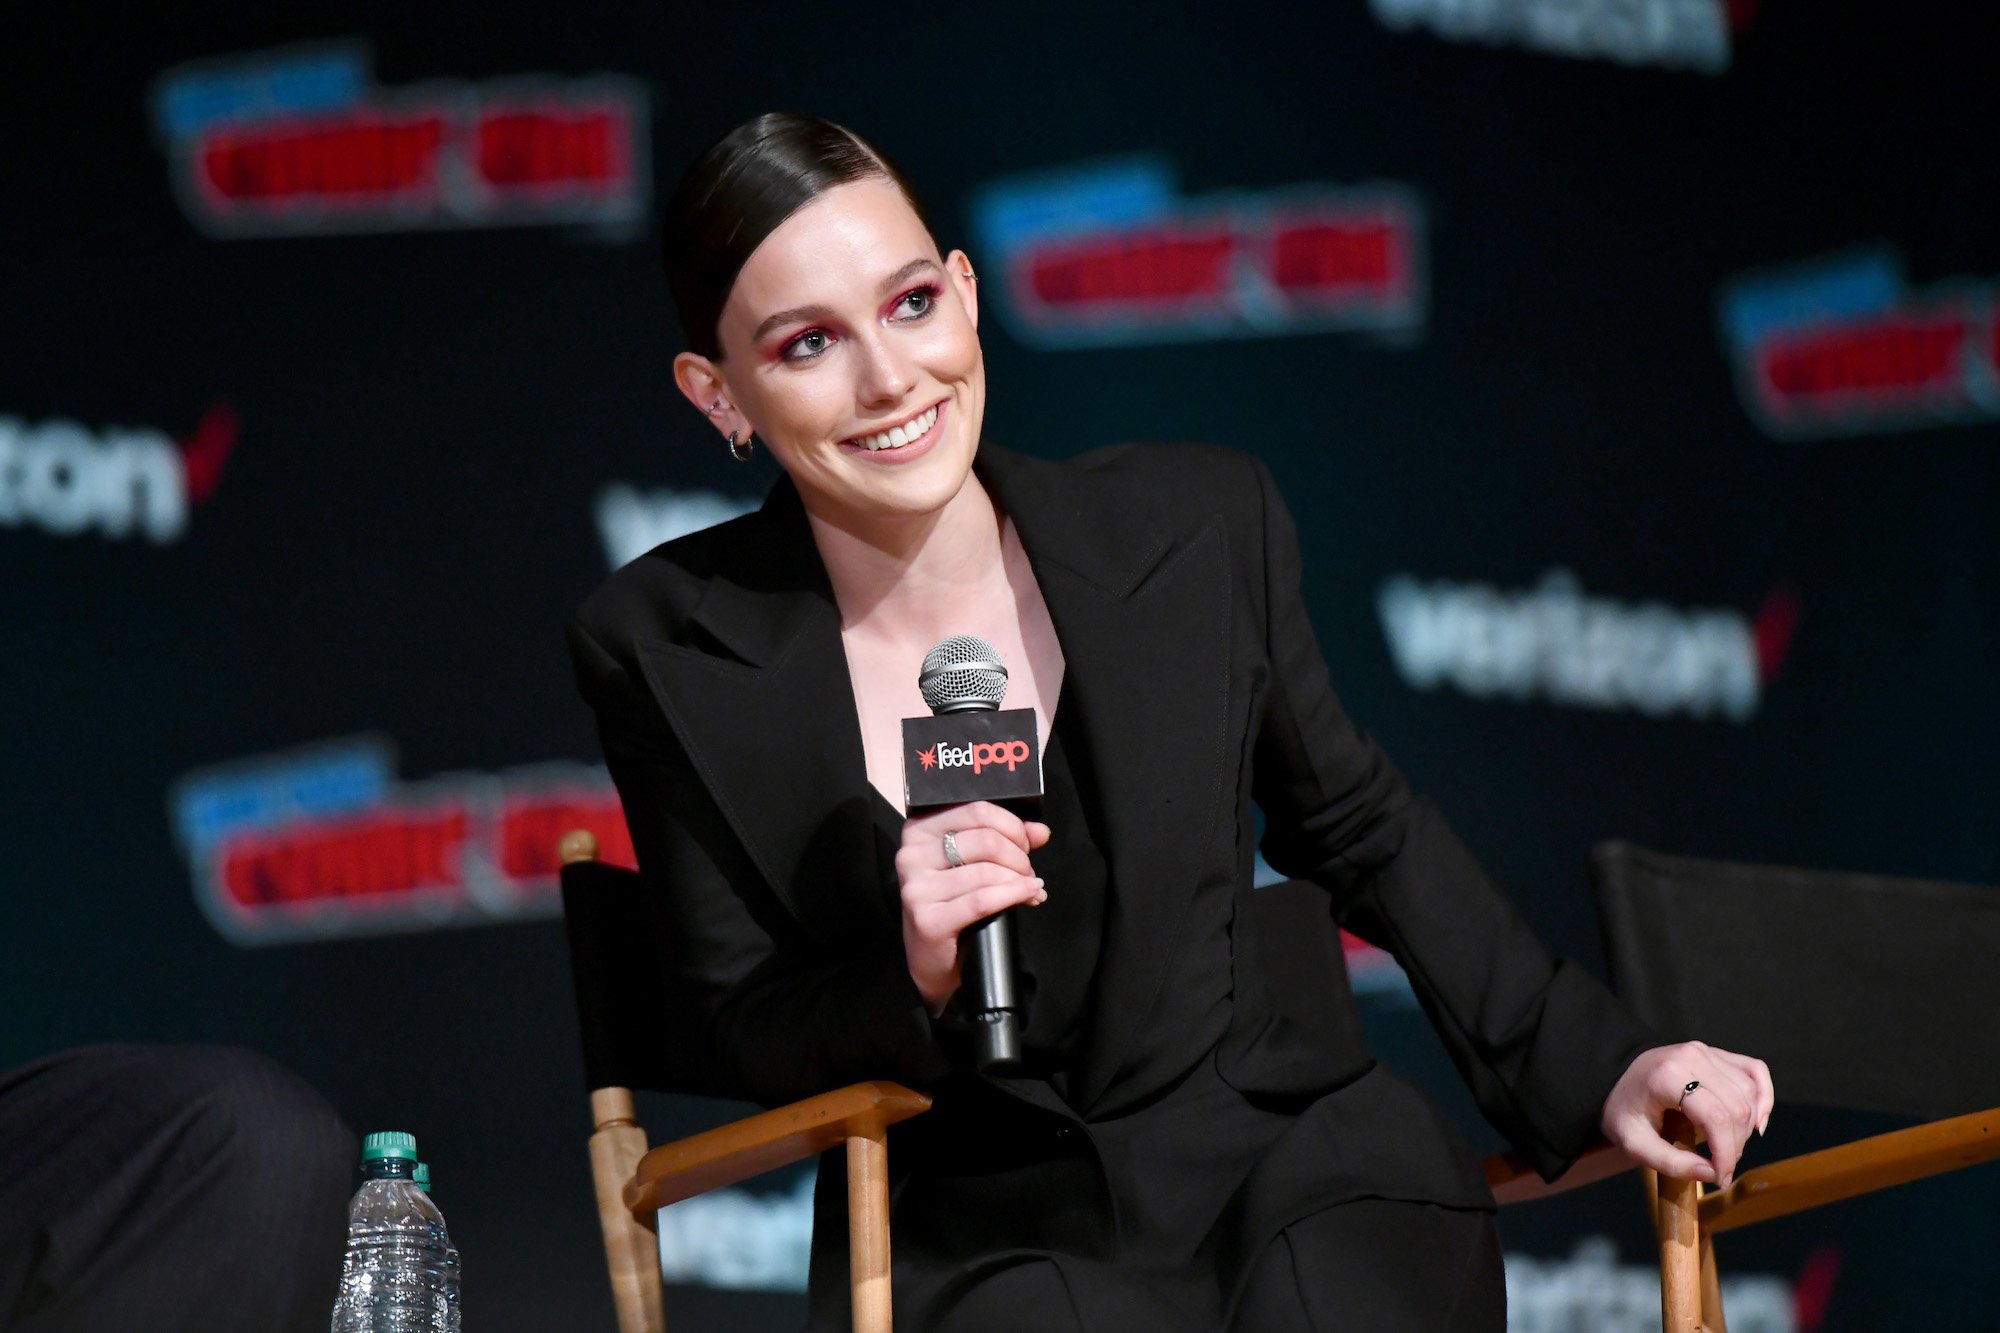 Victoria Pedretti at the Netflix & Chills panel during New York Comic Con 2018 on Oct. 5, 2018.